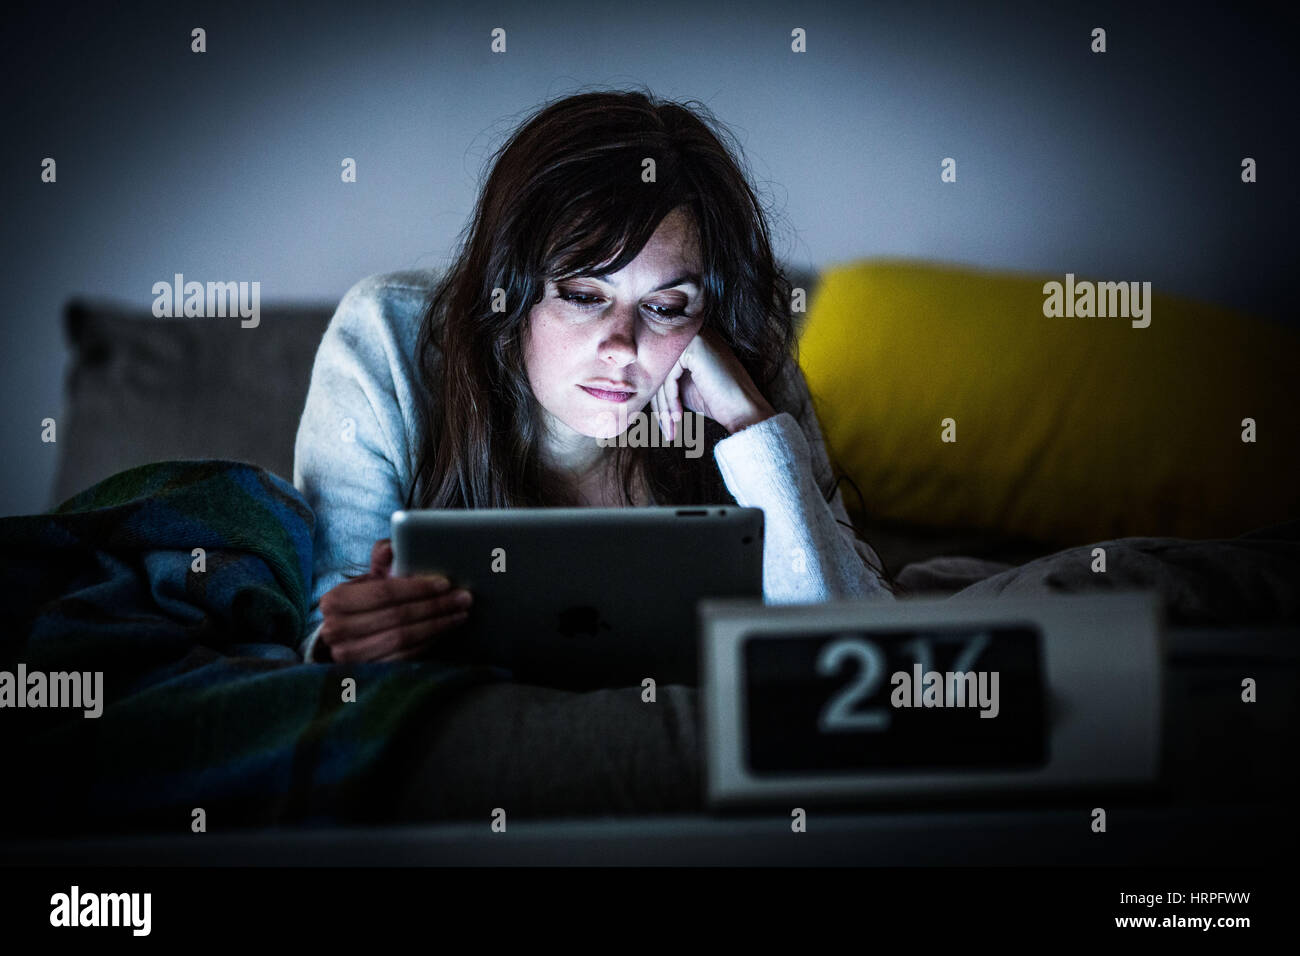 Woman using a digital tablet at night. Stock Photo